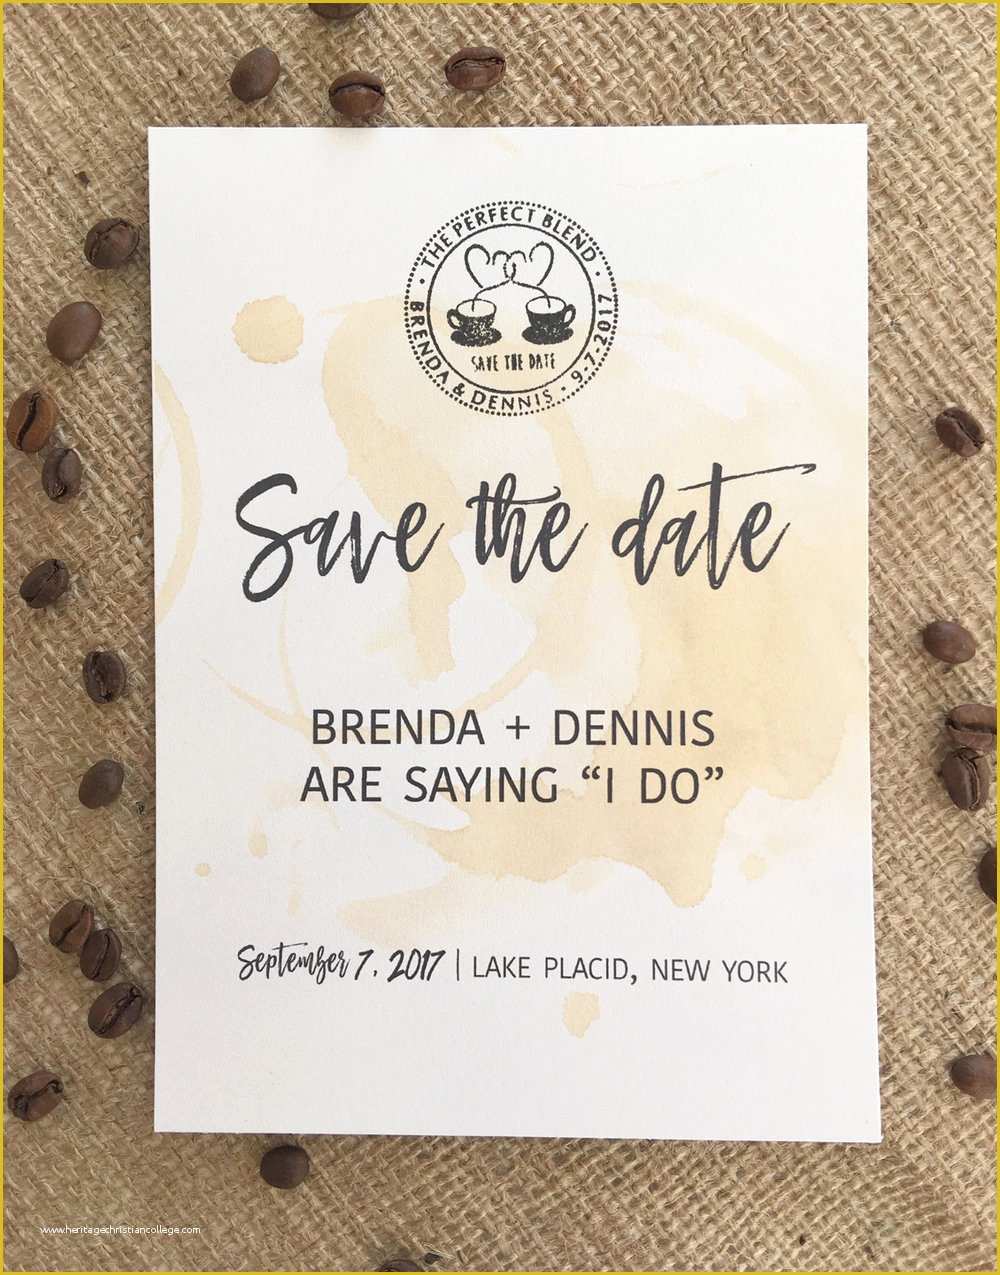 Free Save the Date Wedding Invitation Templates Of the Perfect Blend Save the Date Card Free Wedding